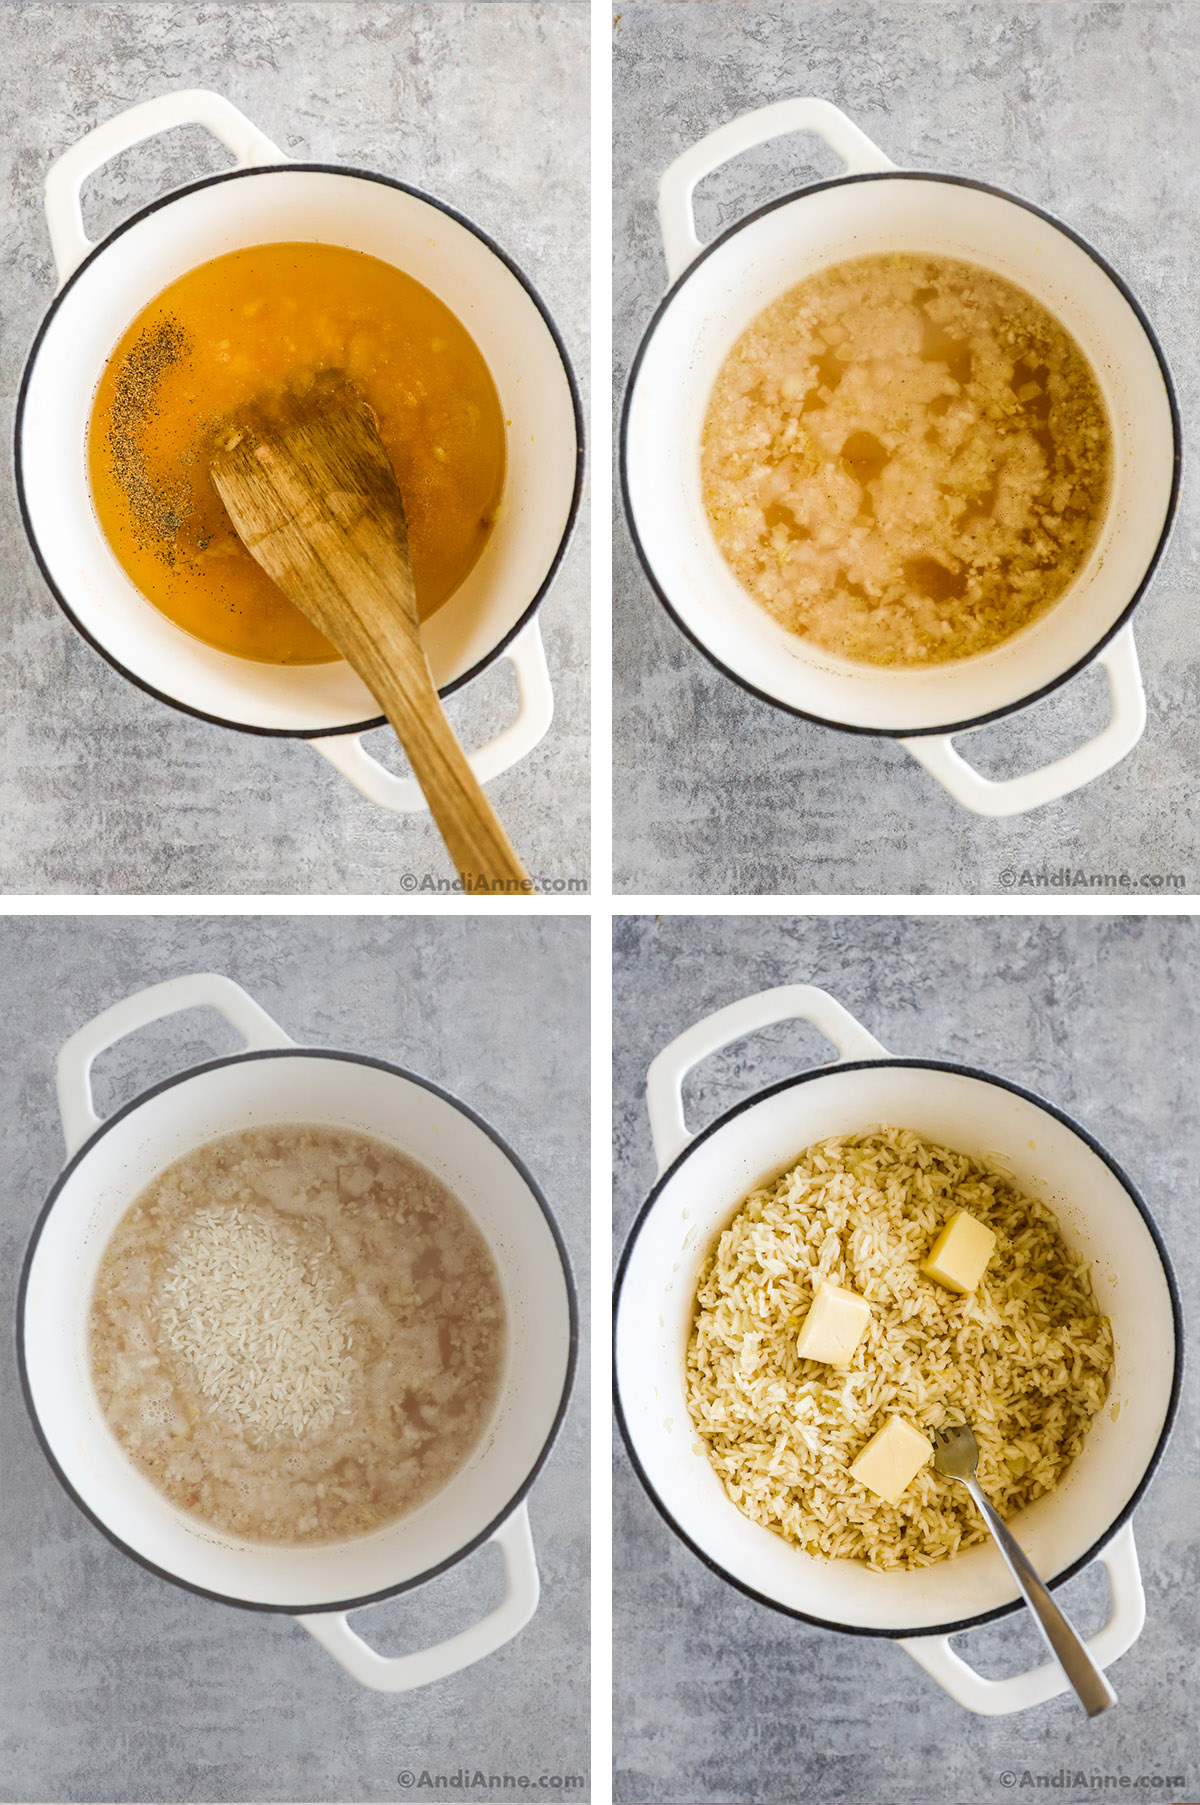 Four images of a white pot showing steps to make recipe. First is broth with pepper and a wood spatula. Second is liquid mixed with chopped onion. Third is rice added to broth. Fourth is cooked rice with chunks of butter and a fork.